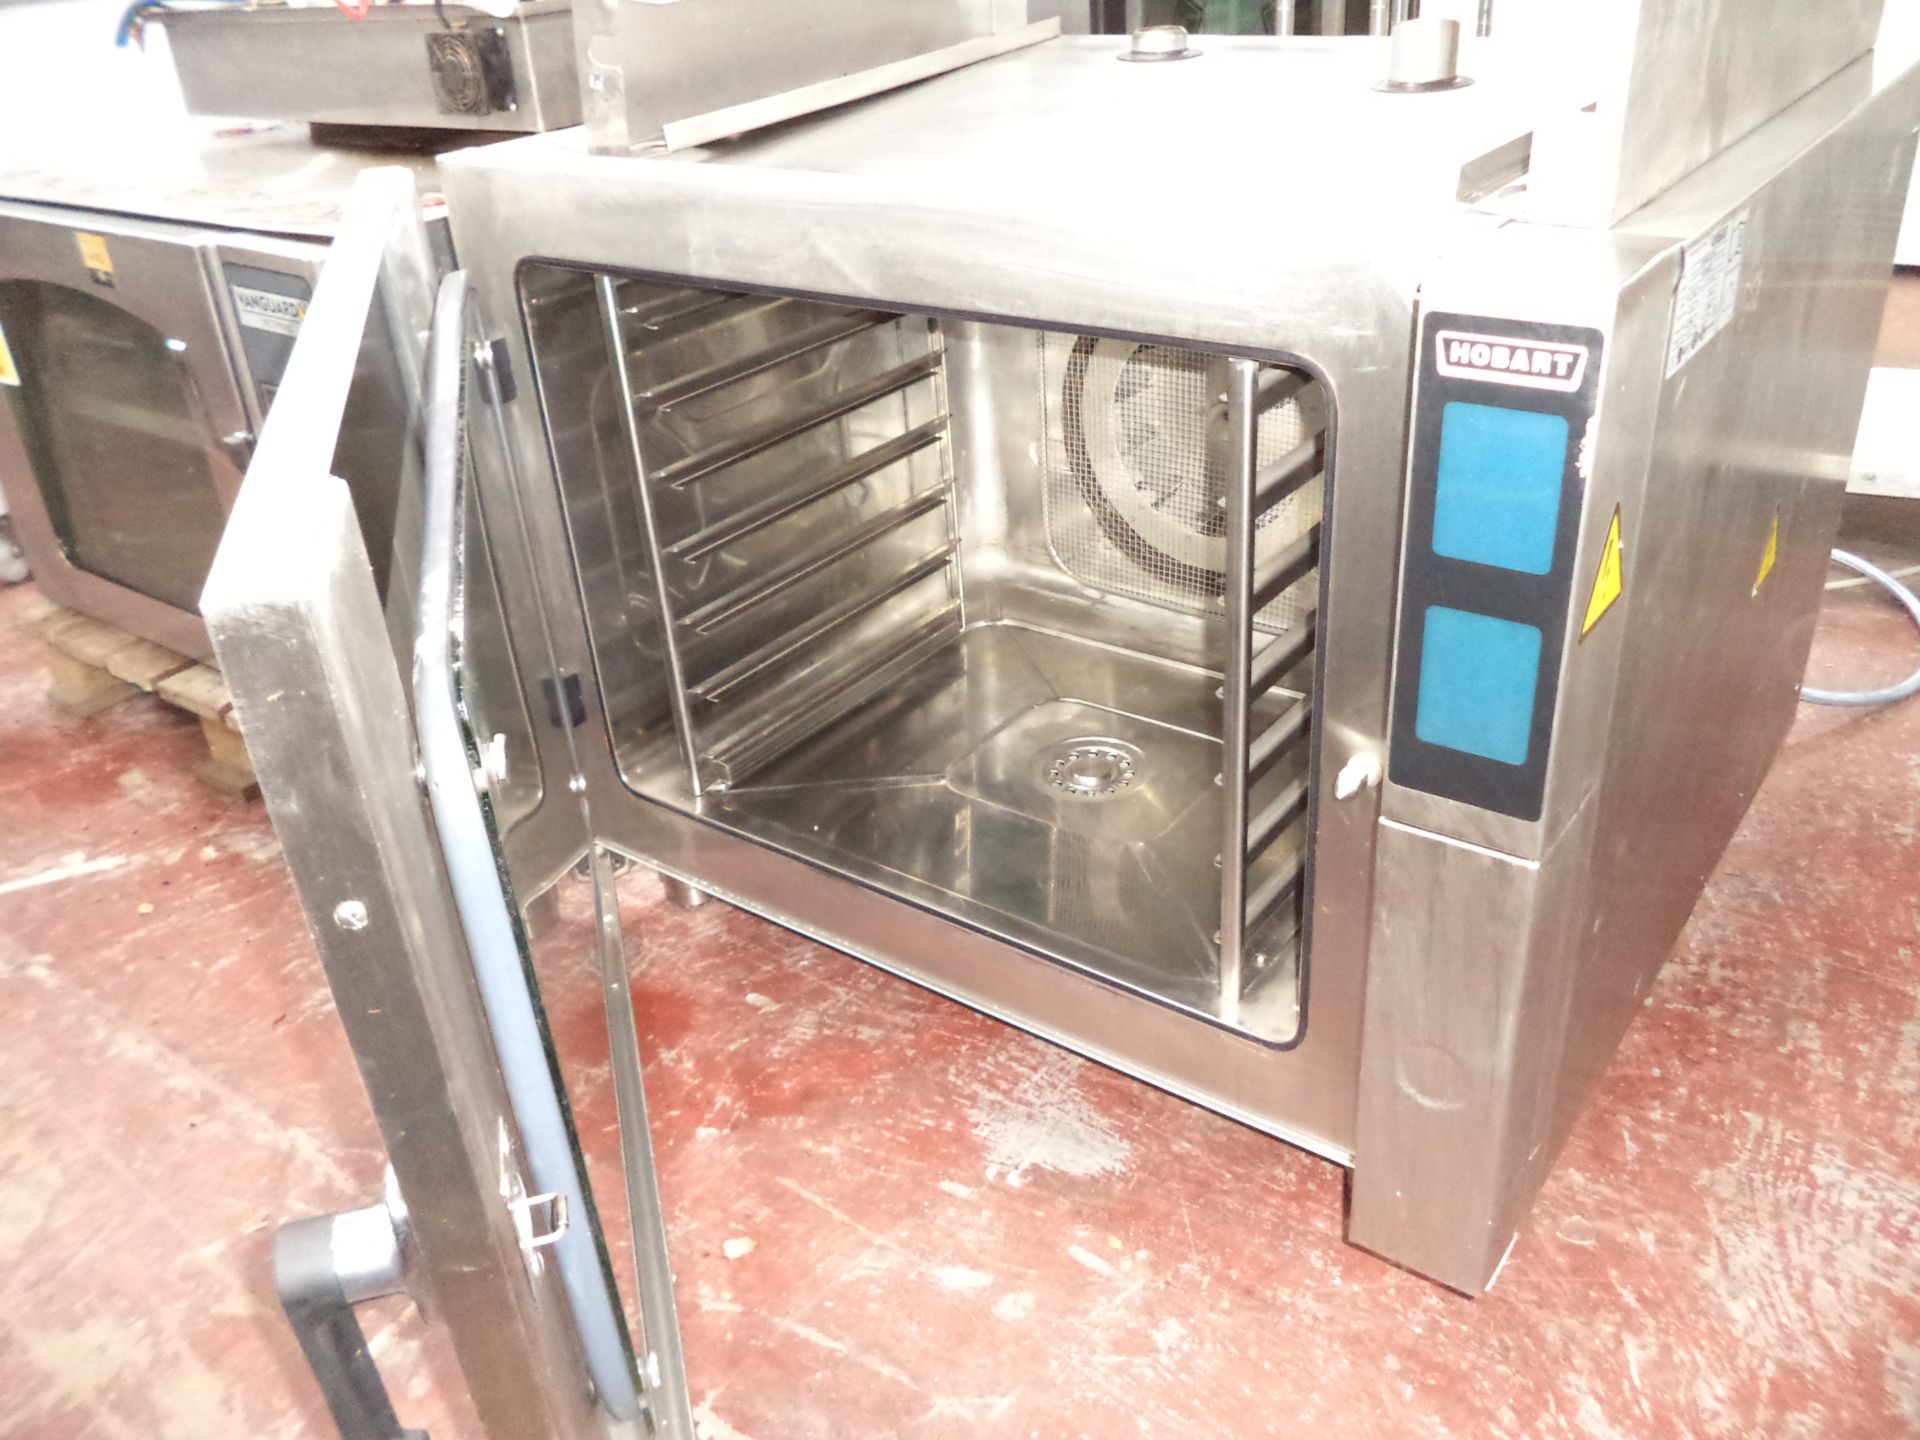 Hobart oven, model CPRO-061G-DA-KK IMPORTANT: Please remember goods successfully bid upon must be - Image 3 of 7